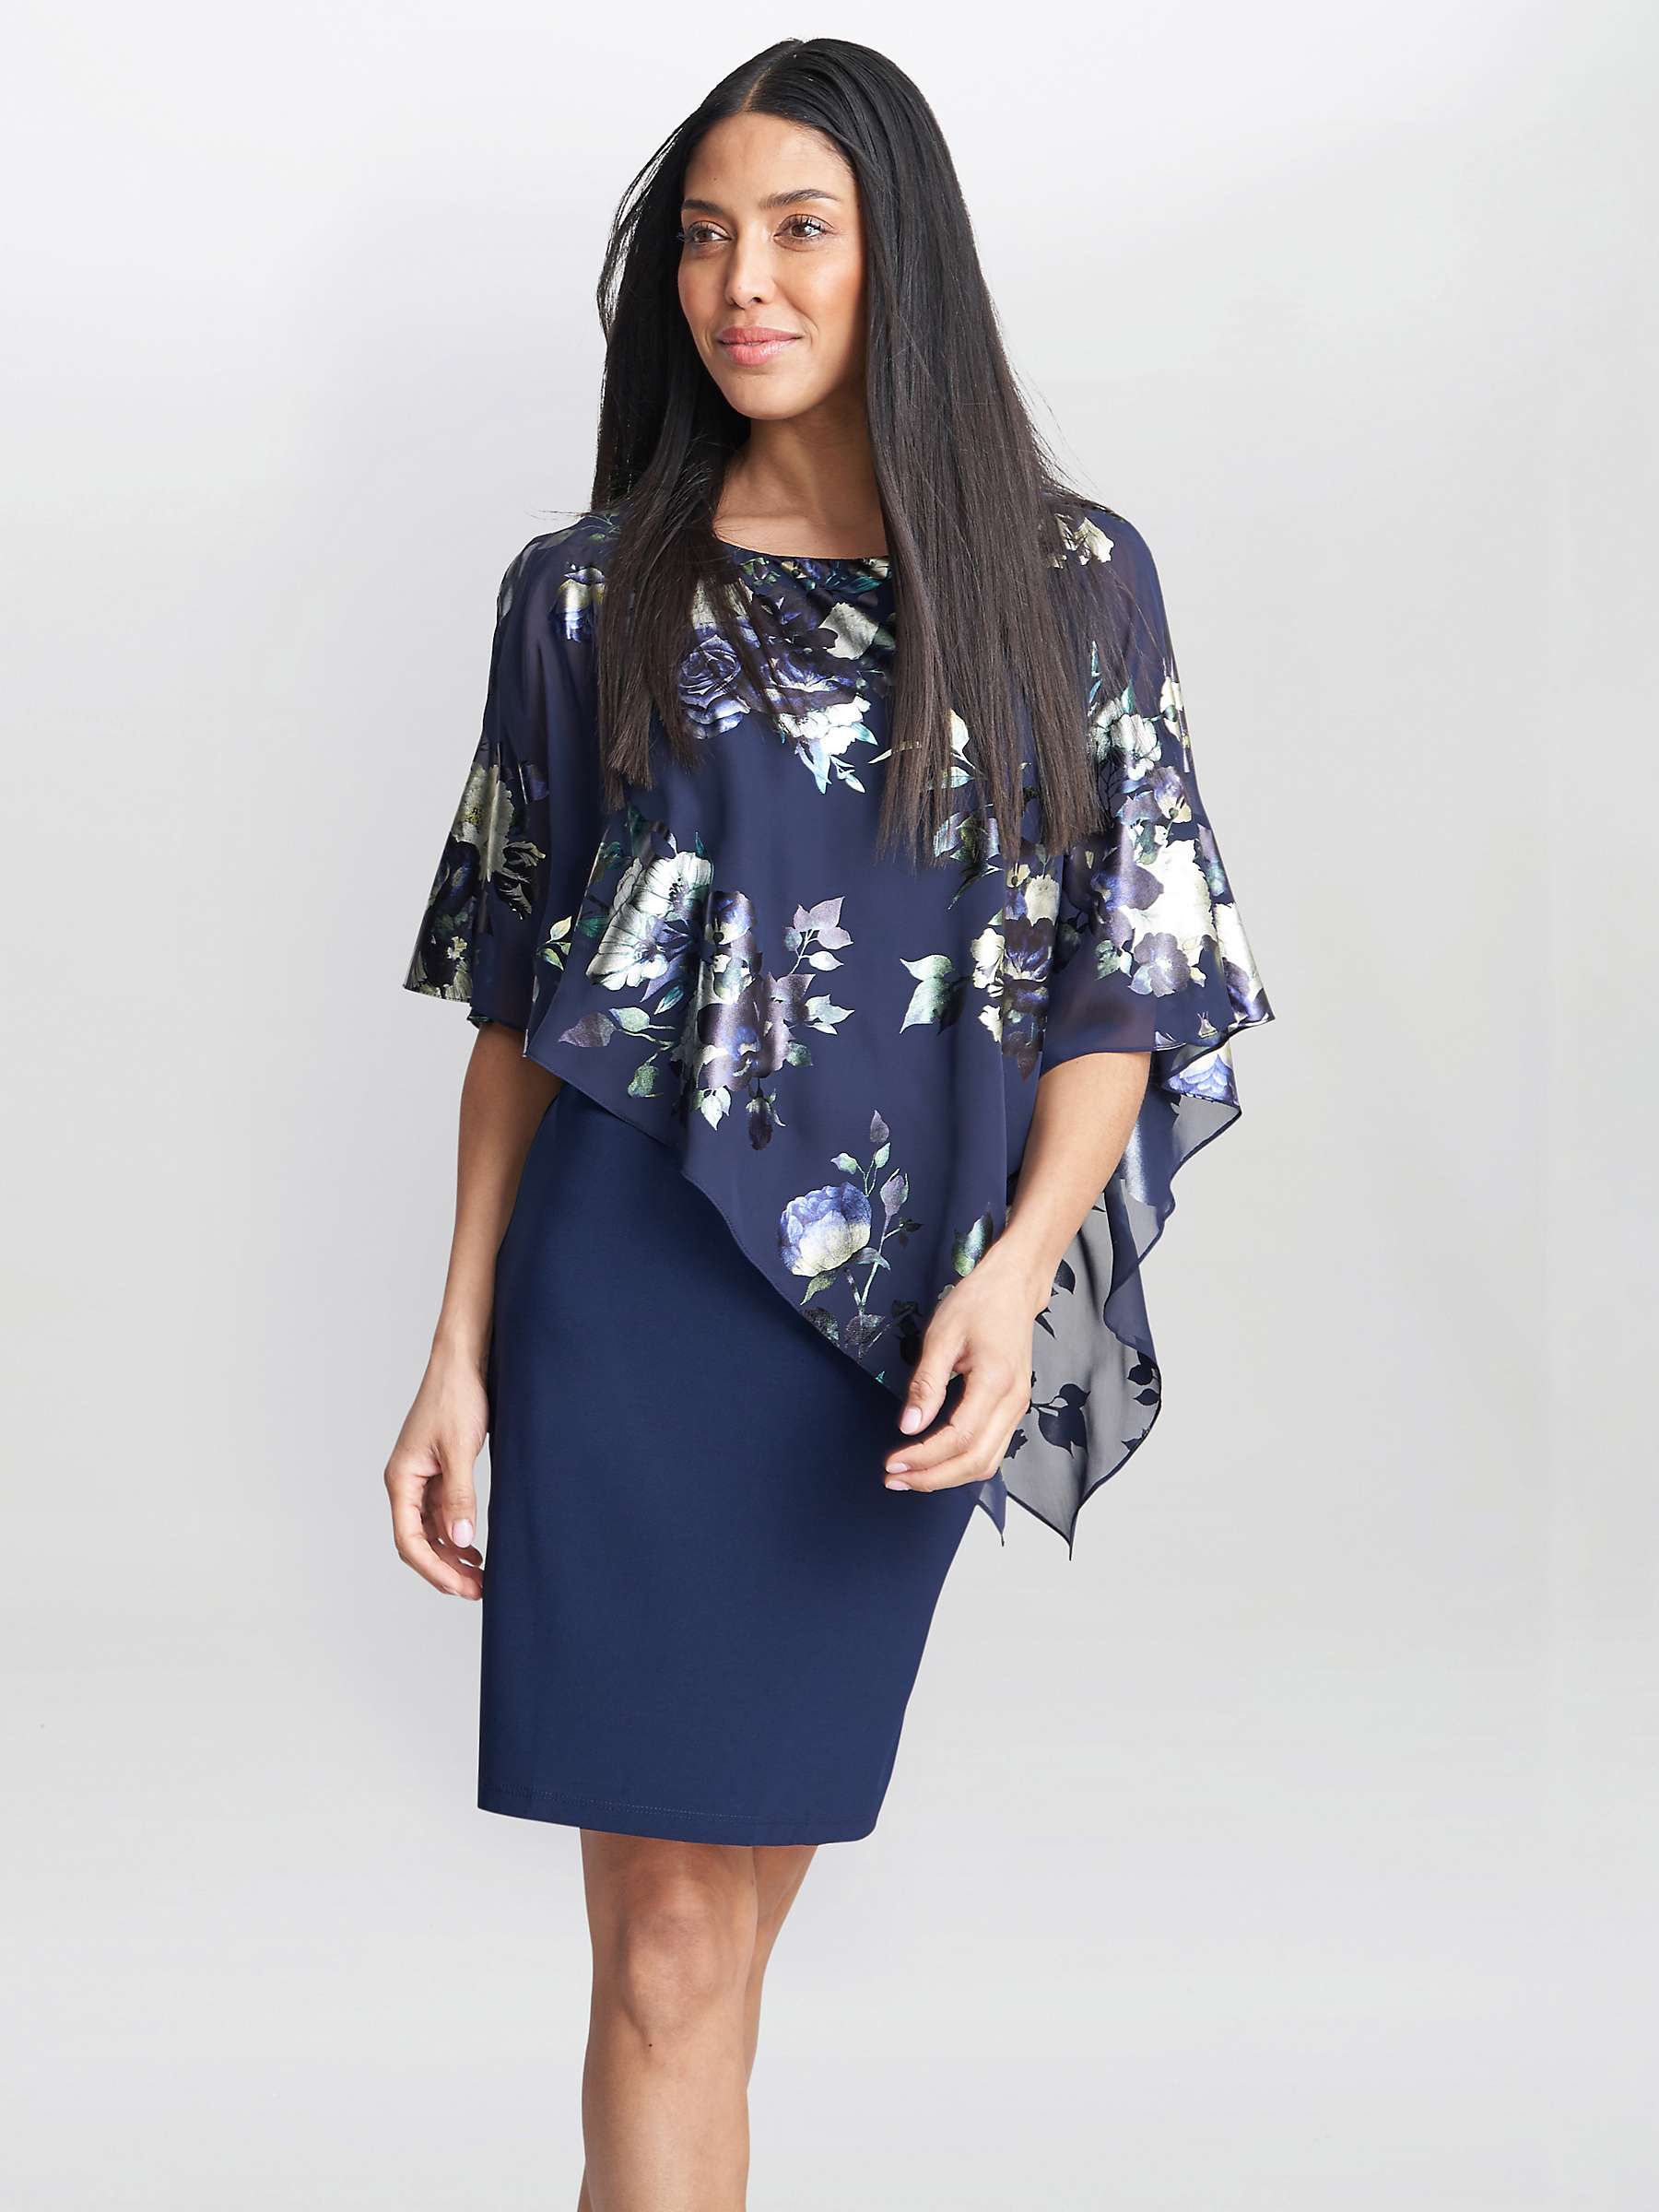 Buy Gina Bacconi Gaby Floral Print Asymmetric Cape Dress, Navy/Multi Online at johnlewis.com